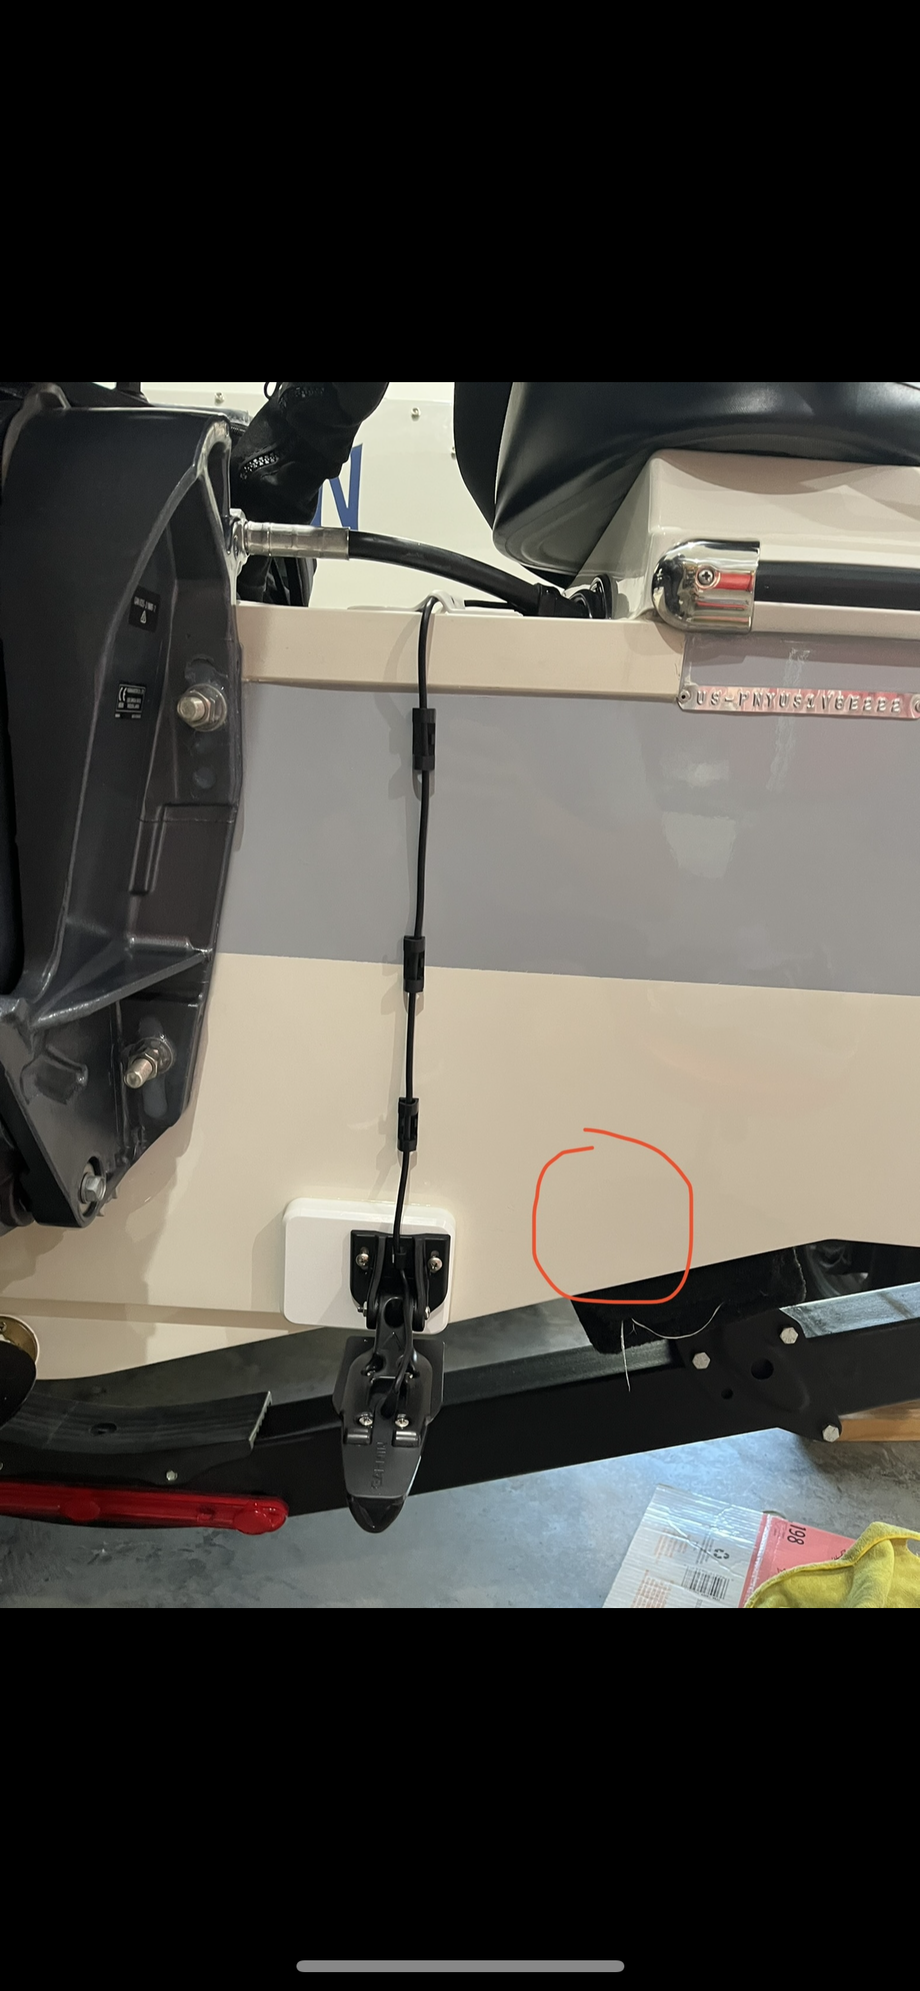 Remedy, Lowrance 3 in 1 transducer roostertail - The Hull Truth